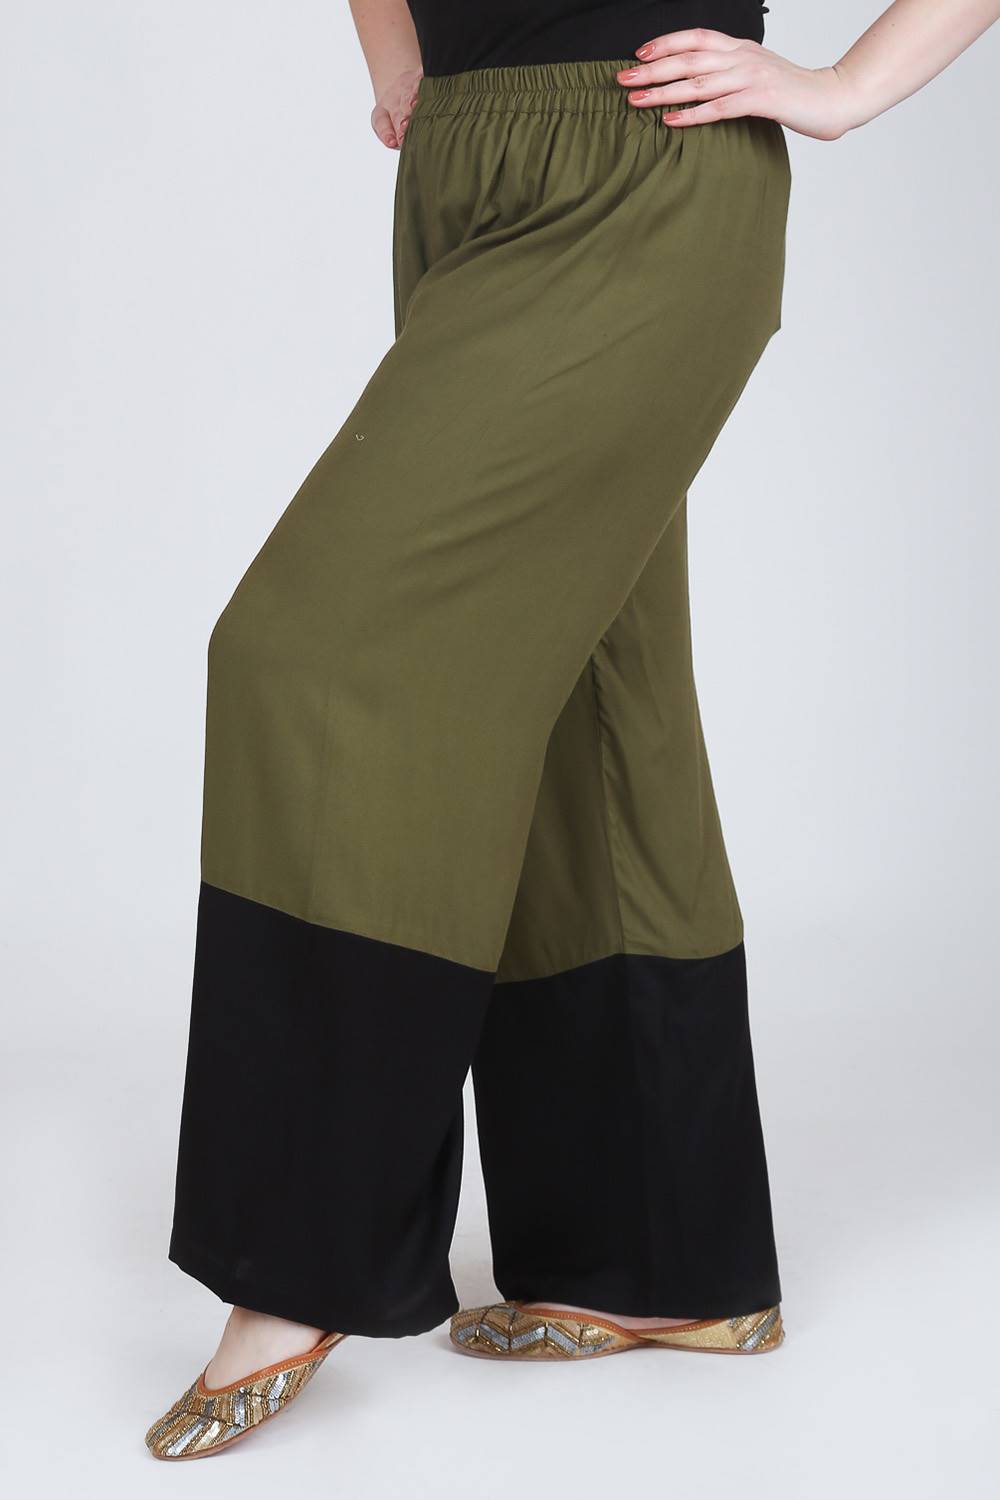 Buy GO COLORS Black Womens Solid Palazzo Pants | Shoppers Stop